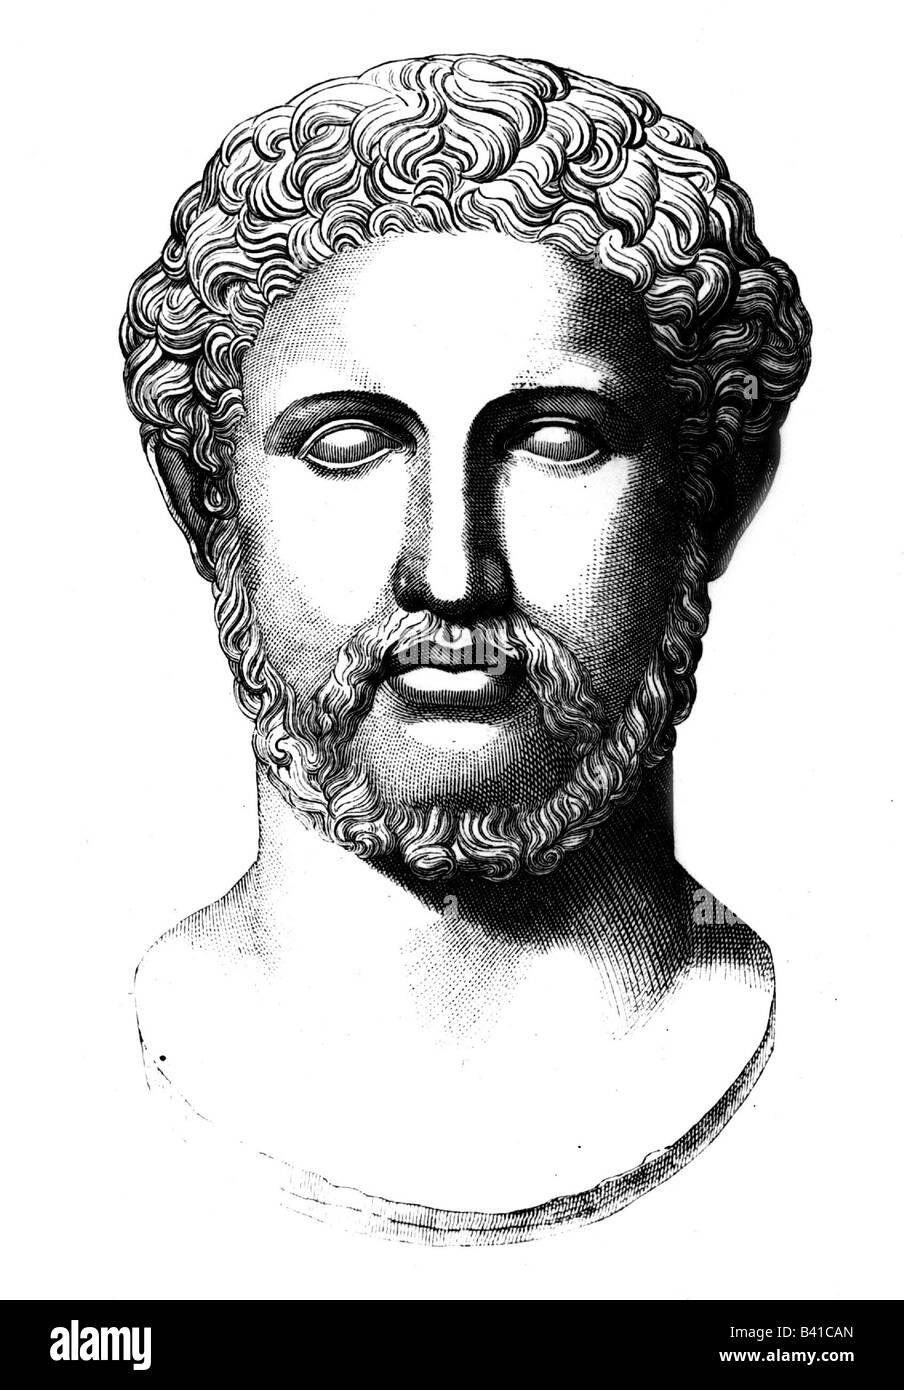 Alcibiades, circa 450 - 404 BC, Athenian politician and general, portrait, engraving after ancient bust, Museo Chiraramonti, Vatican, Rome, Italy, 19th century, Stock Photo